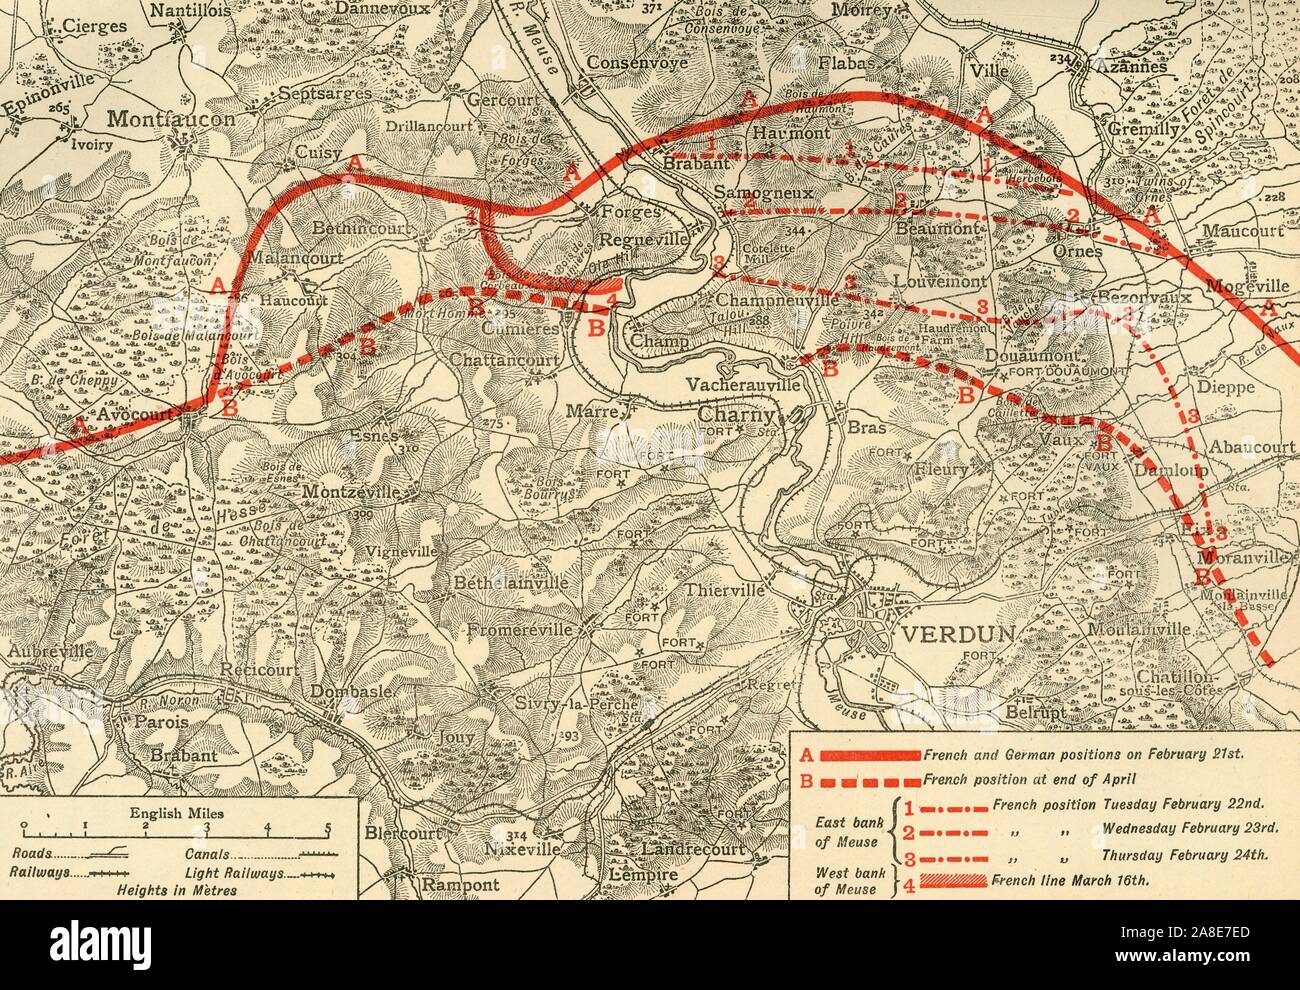 French and German positions in the Battle of Verdun, northern France, First World War, 1916, (c1920). Solid red line indicates French and German positions on 21 February; dotted red line indicates French position at end of April. From &quot;The Great World War: A History&quot;, Volume V, edited by Frank A Mumby. [The Gresham Publishing Company Ltd, London, c1920] Stock Photo